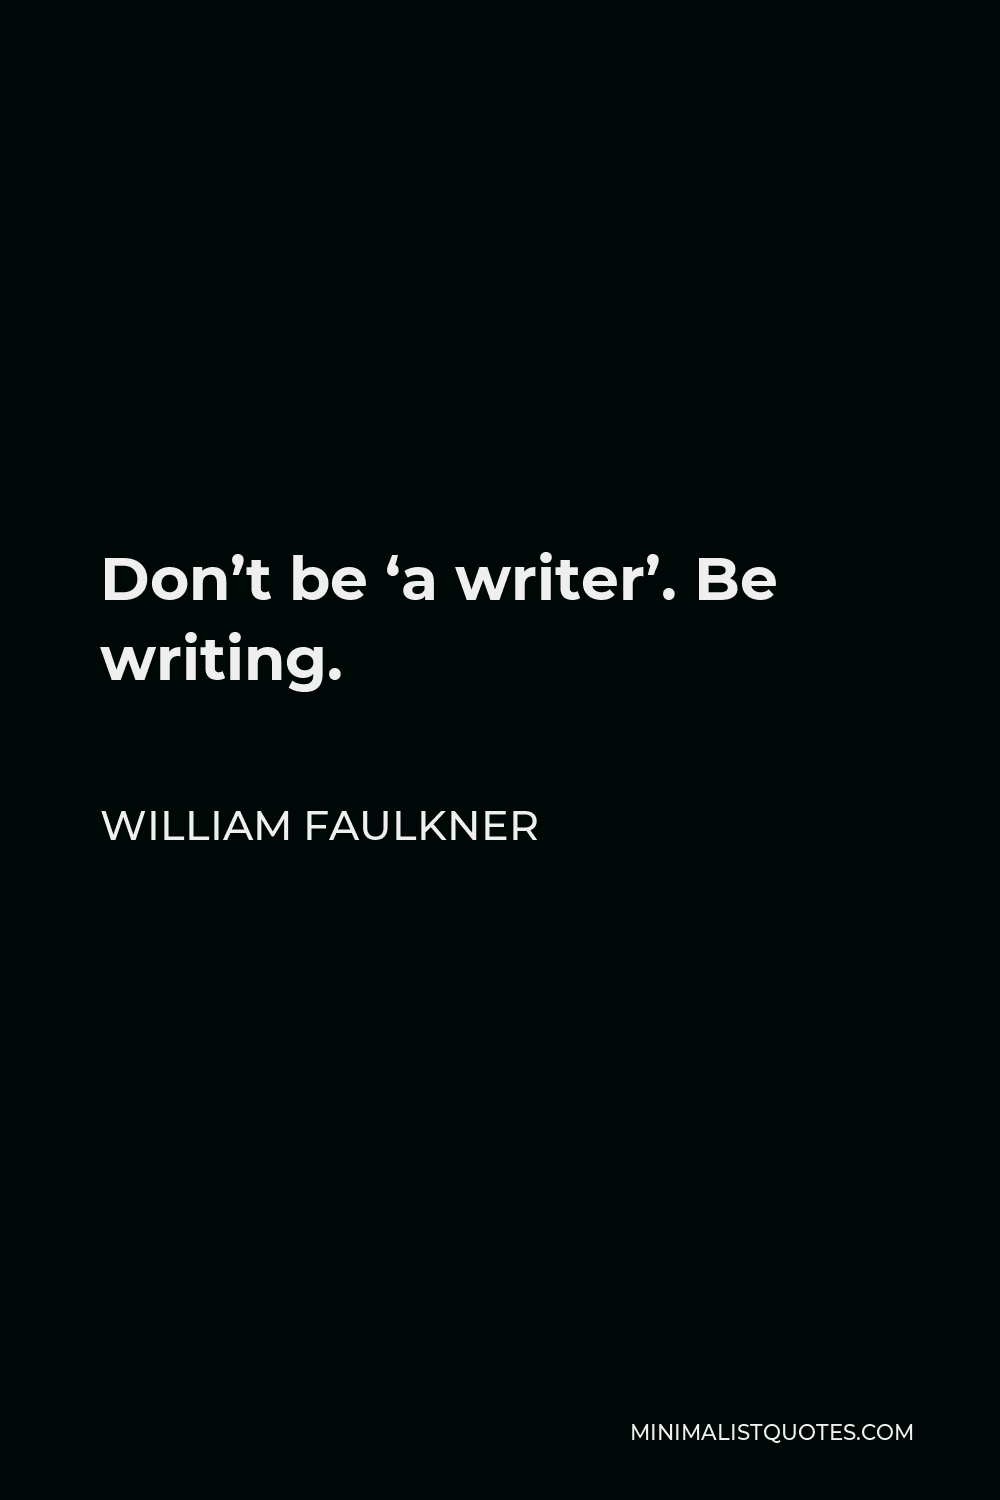 William Faulkner Quote - Don’t be ‘a writer’. Be writing.